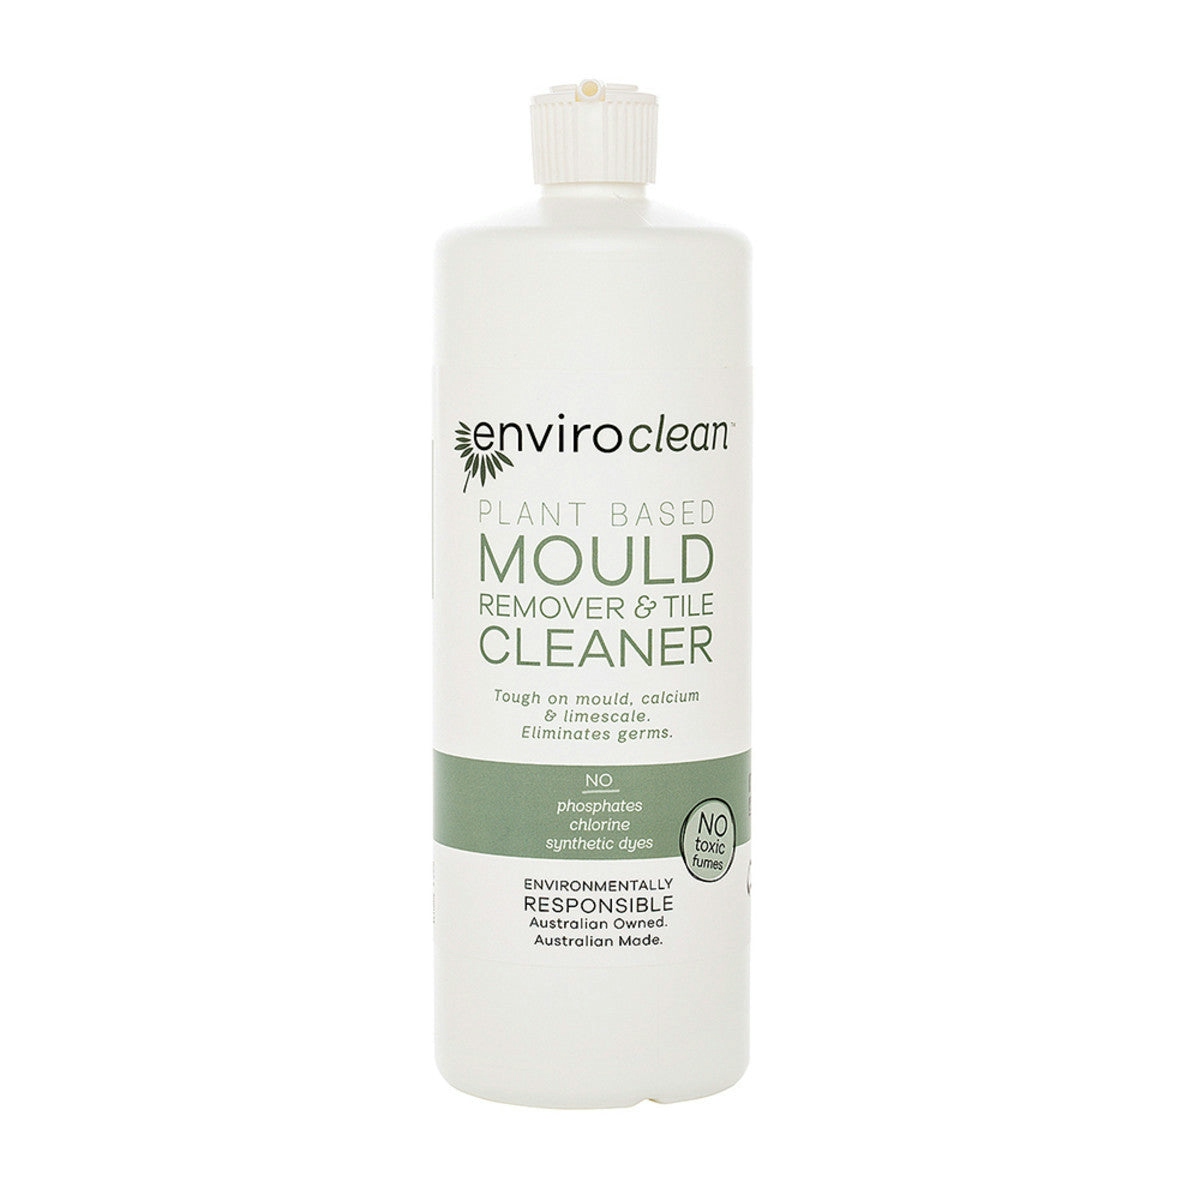 image of EnviroClean Plant Based Mould Remover & Tile Cleaner 1L on white background 